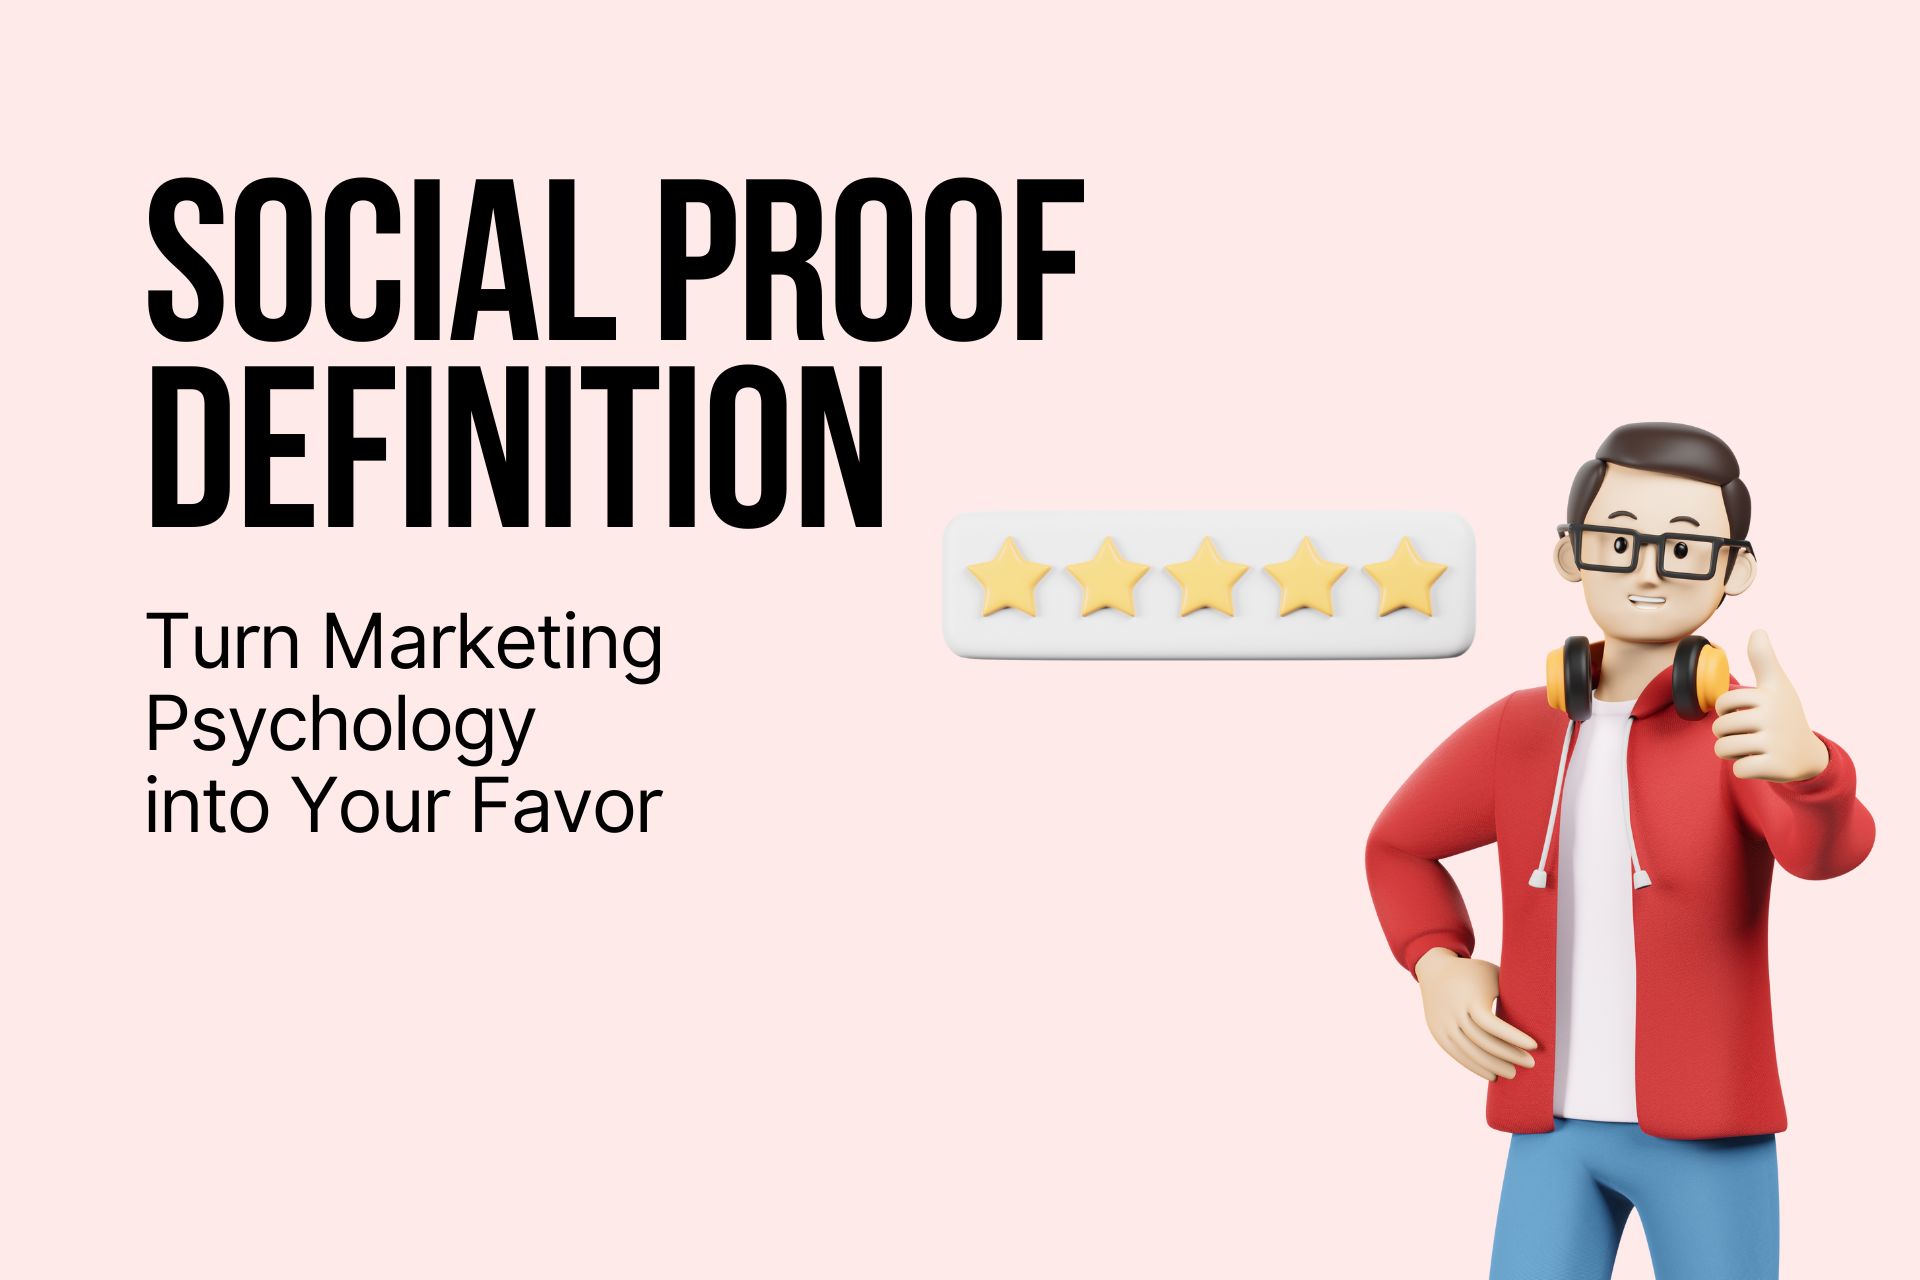 Social Proof Definition; Turn Marketing Psychology into Your Favor